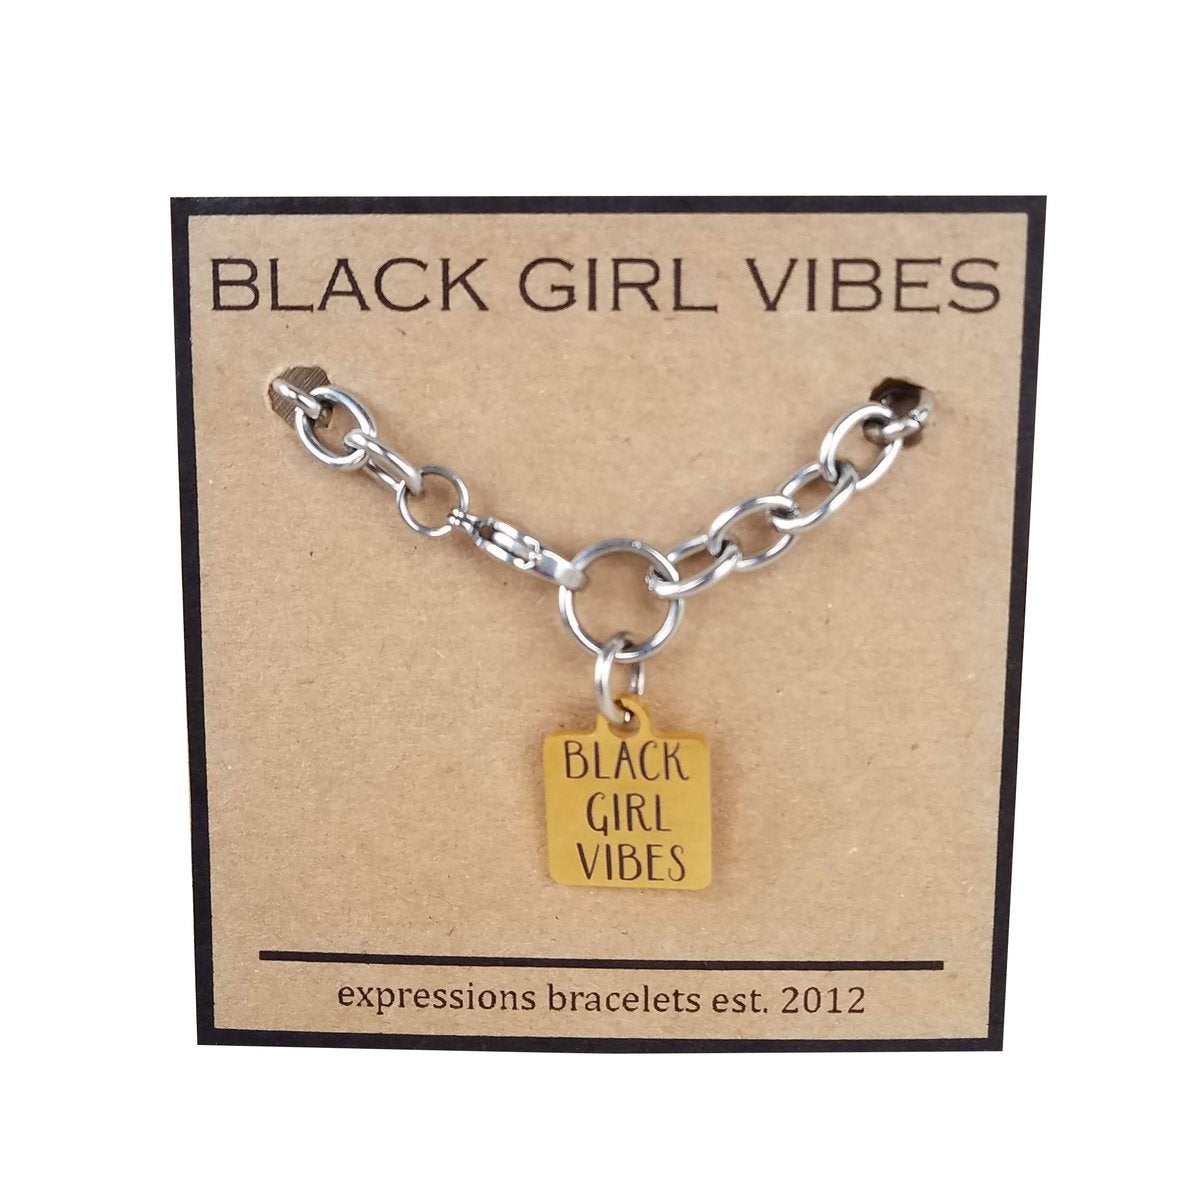 #BuyBlack Gift Guide: 27 Gifts For The Women On Your List